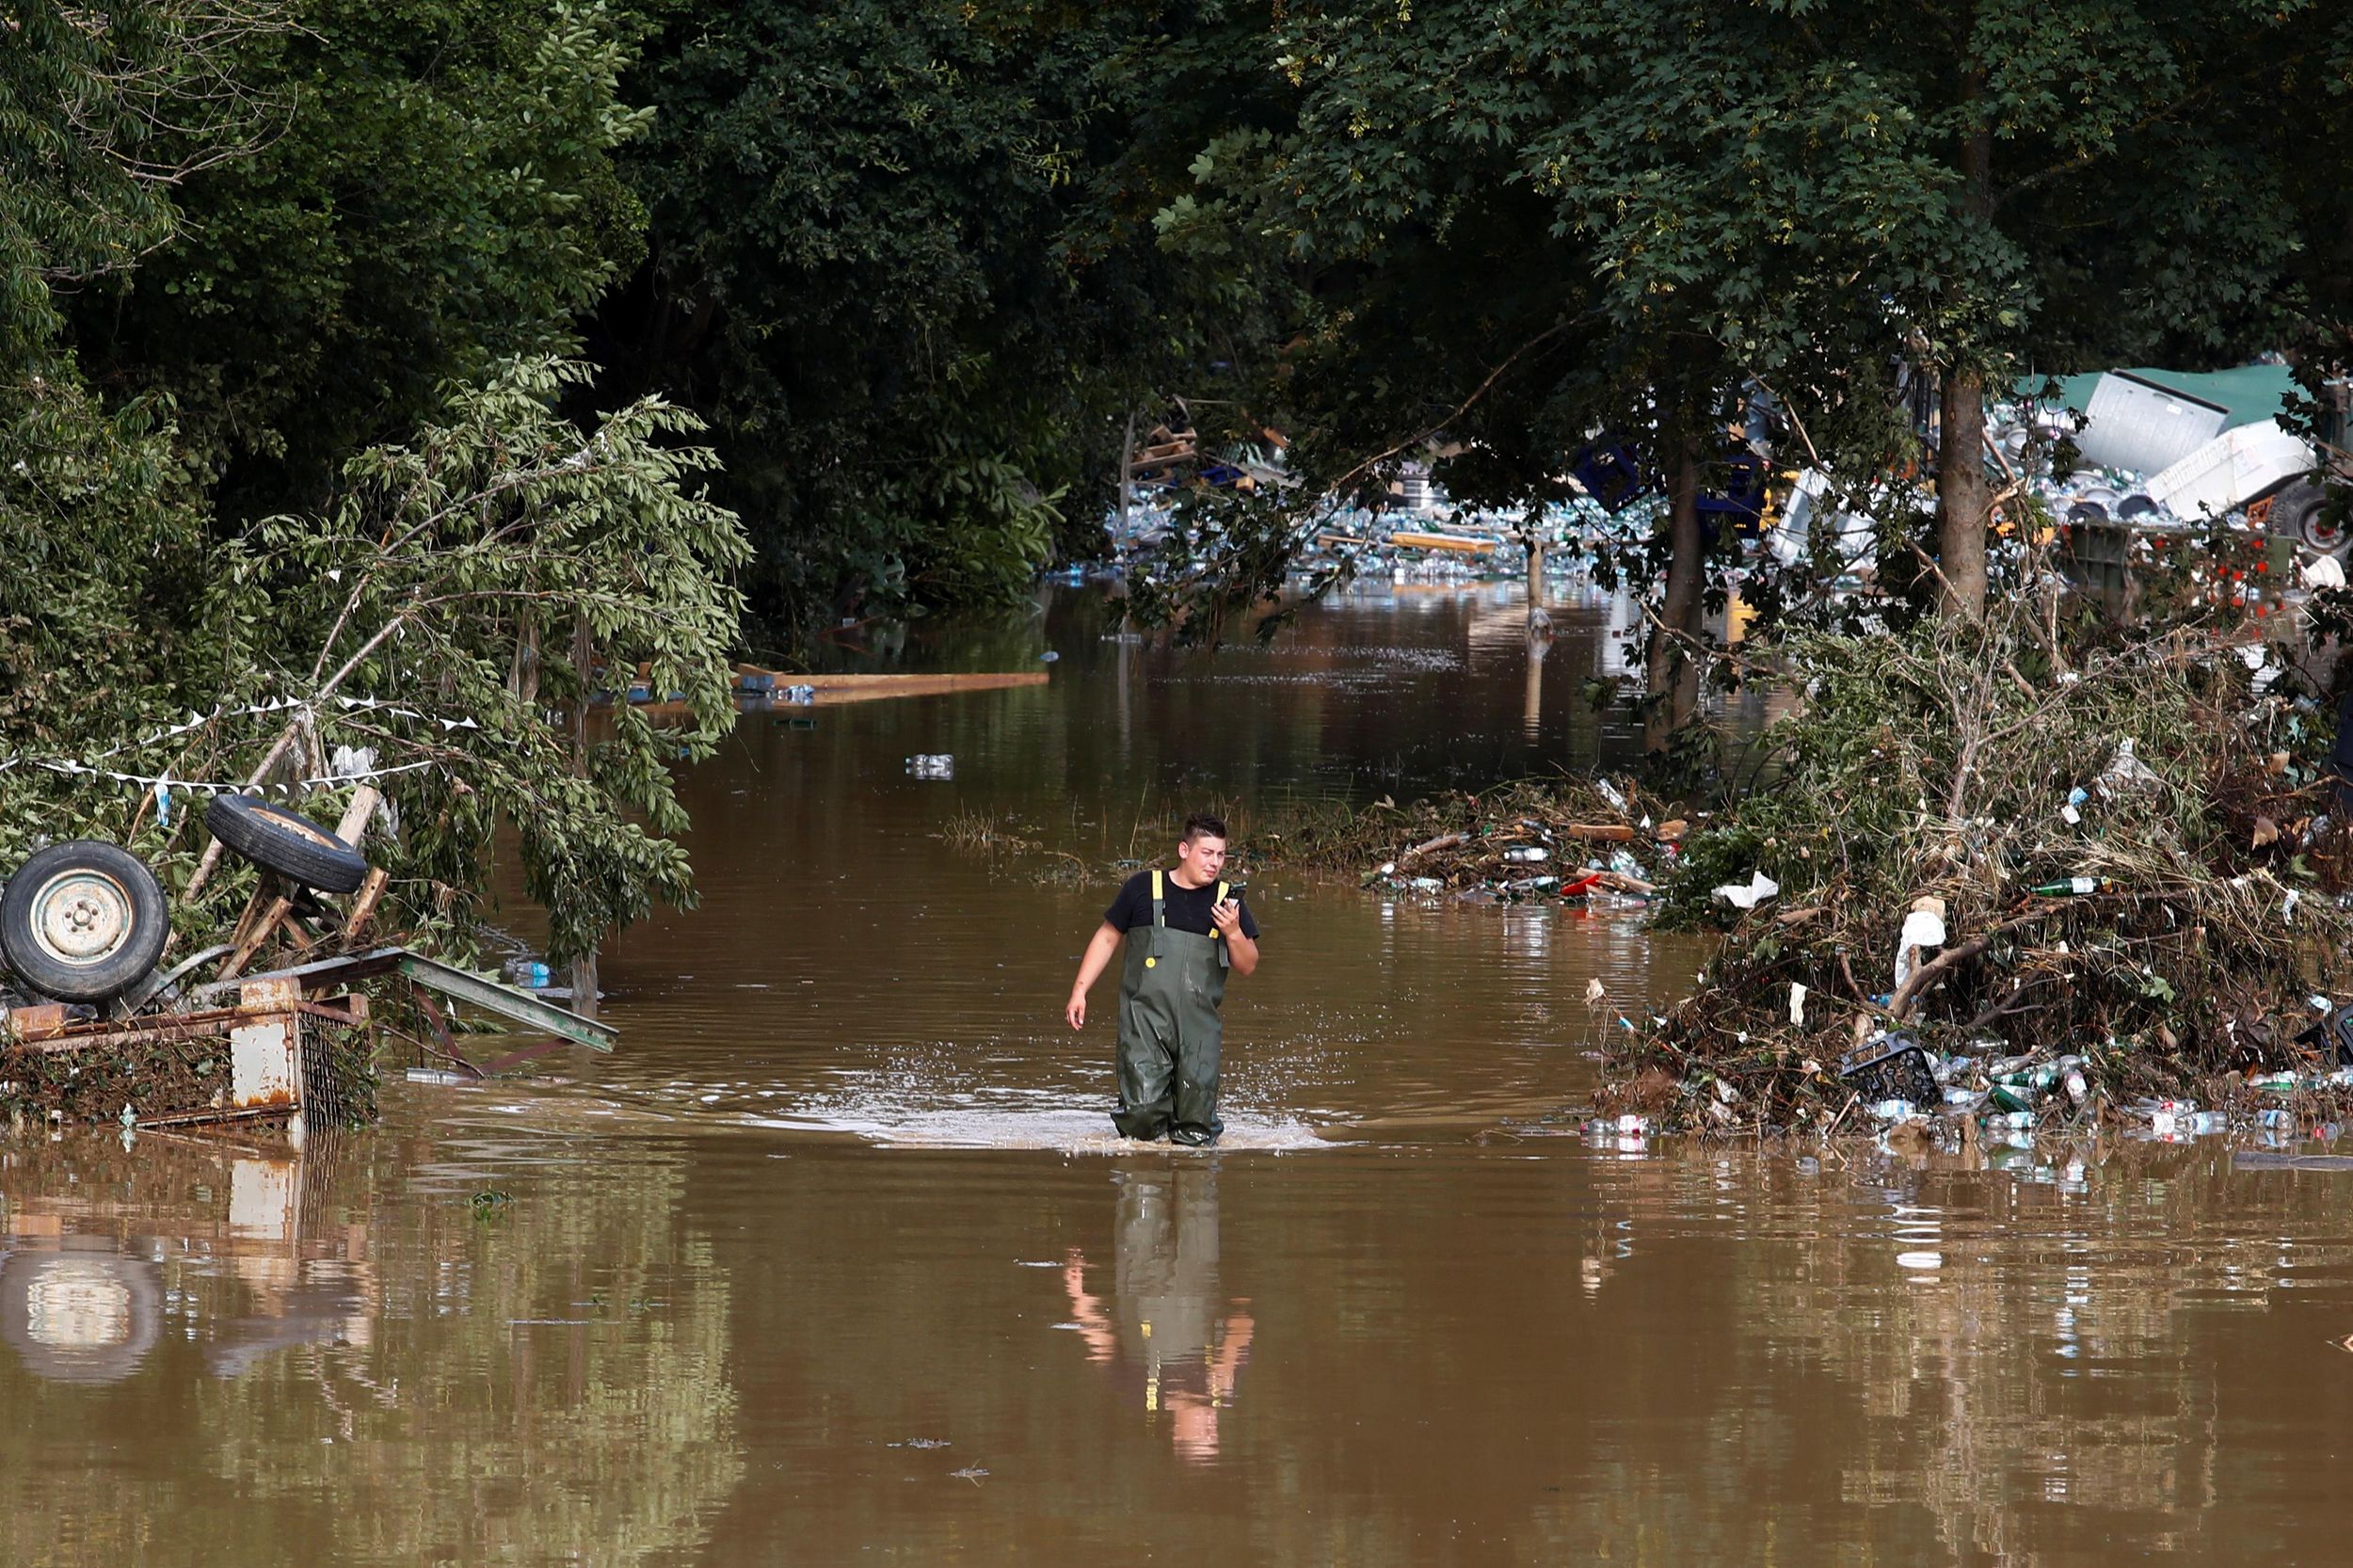 A man walks through the water in an area affected by floods following heavy rainfalls in Bad Neuenahr-Ahrweiler, Germany, July 15, 2021